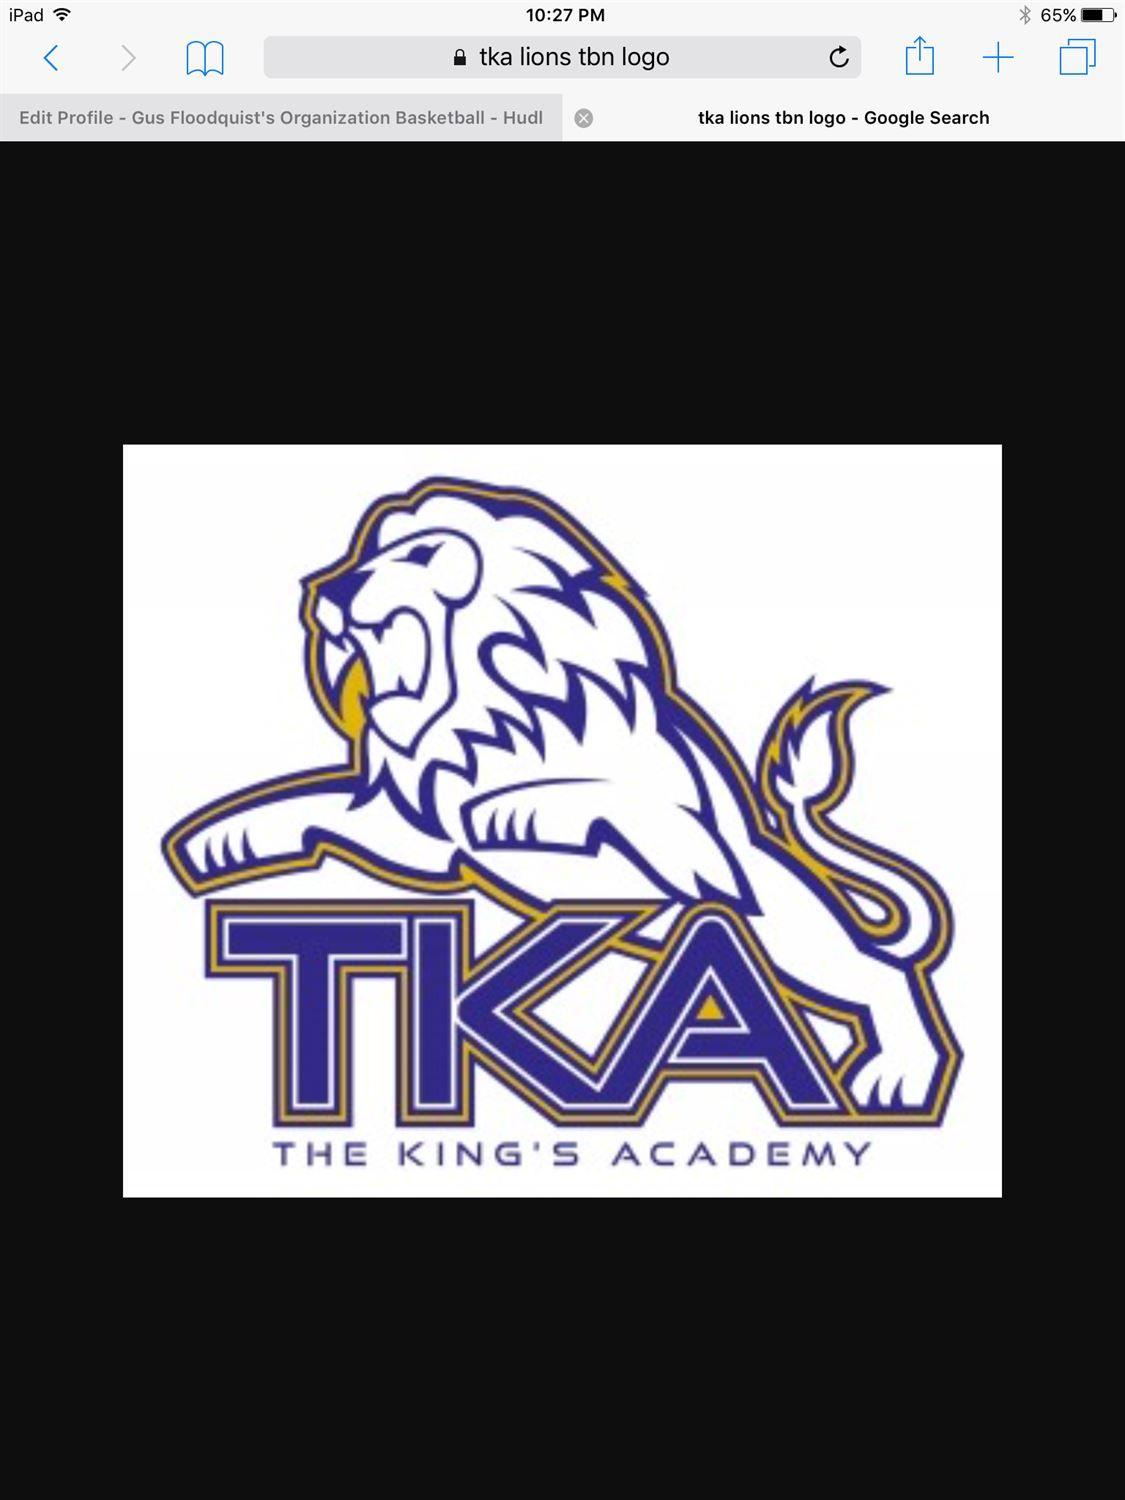 TKA Logo - The King's Academy - TKA LIONS BASKETBALL - Sevierville, Tennessee ...